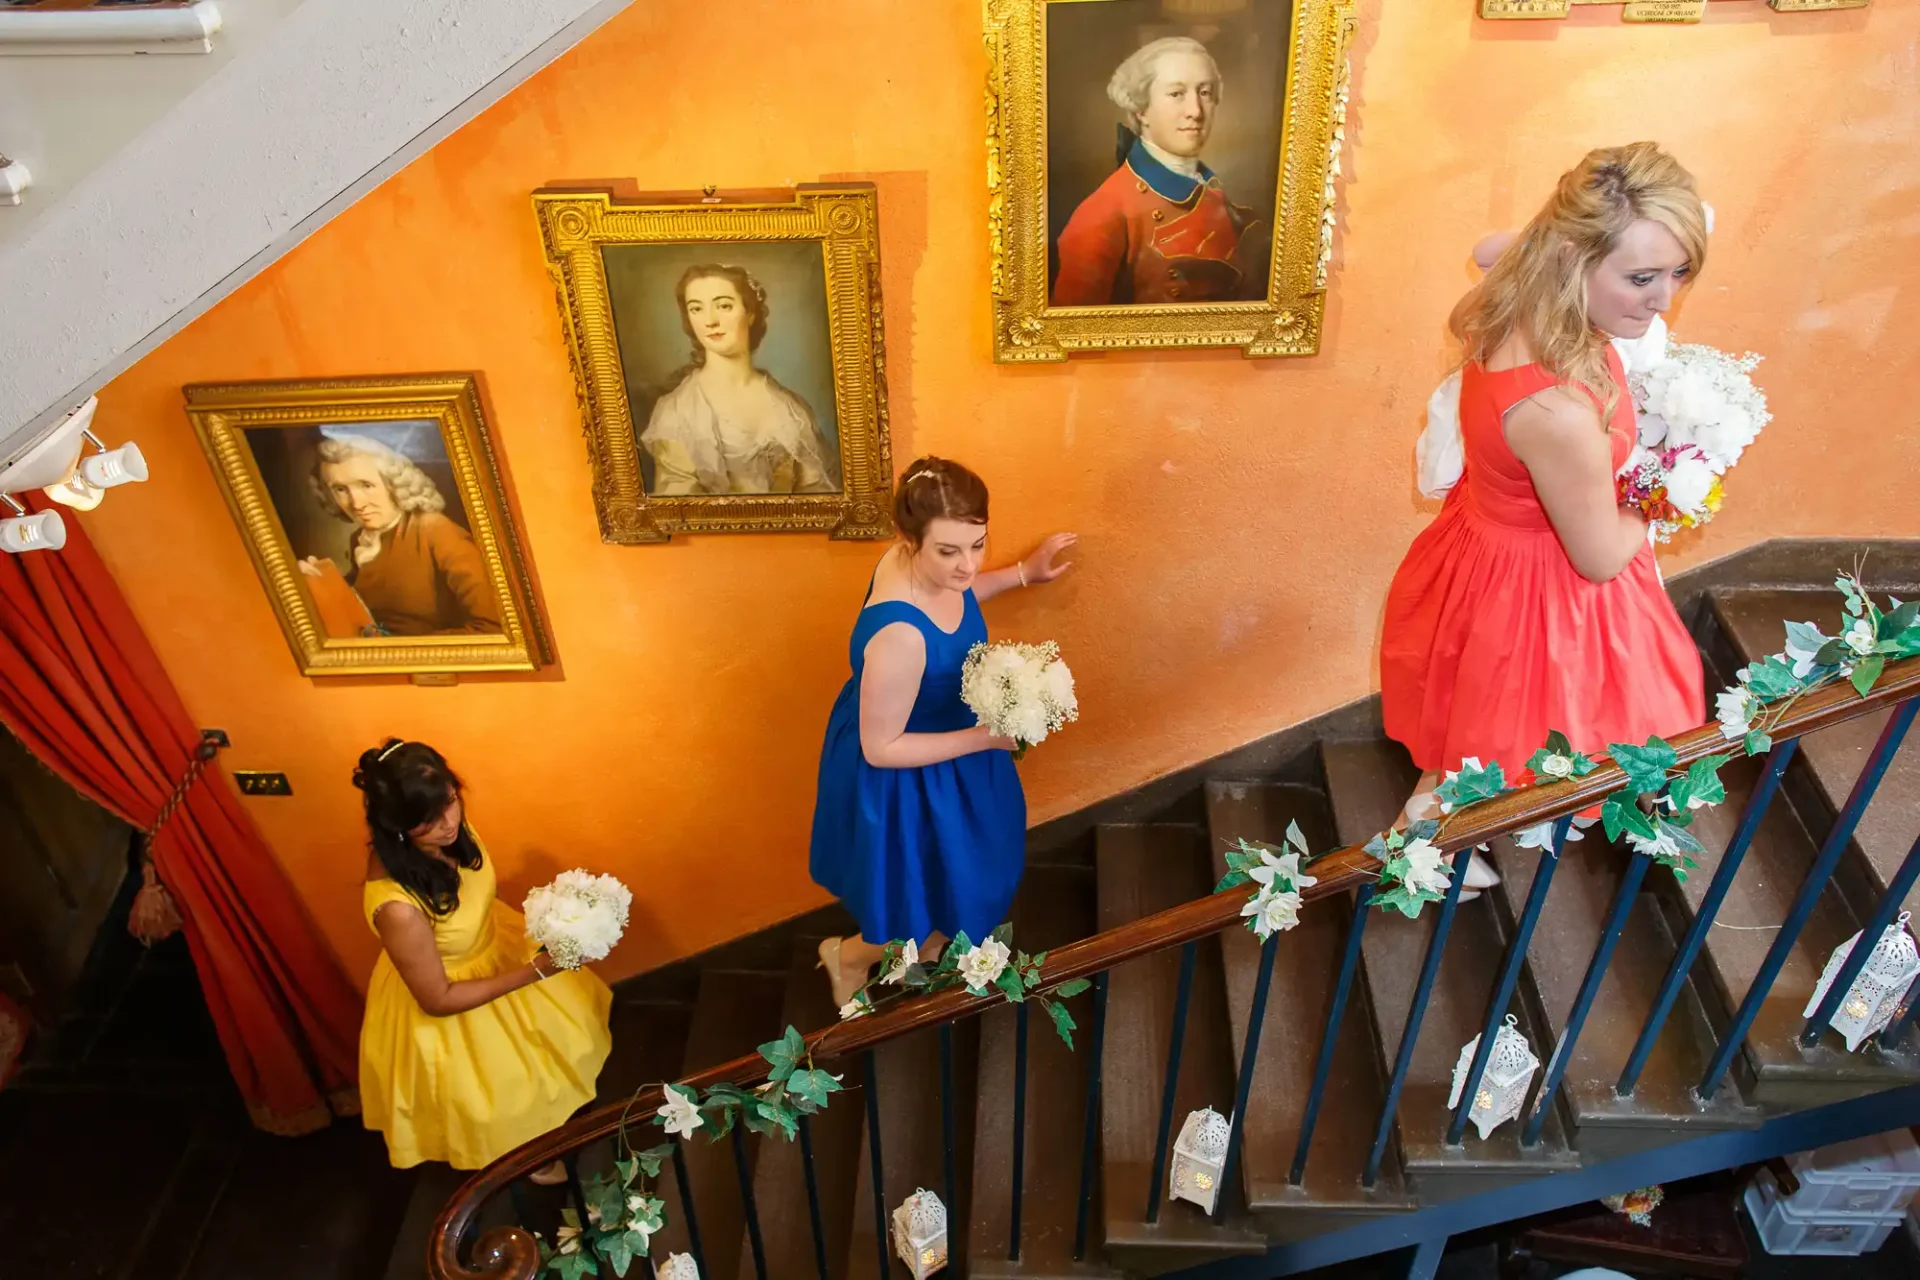 Three women in colorful dresses holding bouquets pose on a staircase adorned with greenery, surrounded by portraits on orange walls.